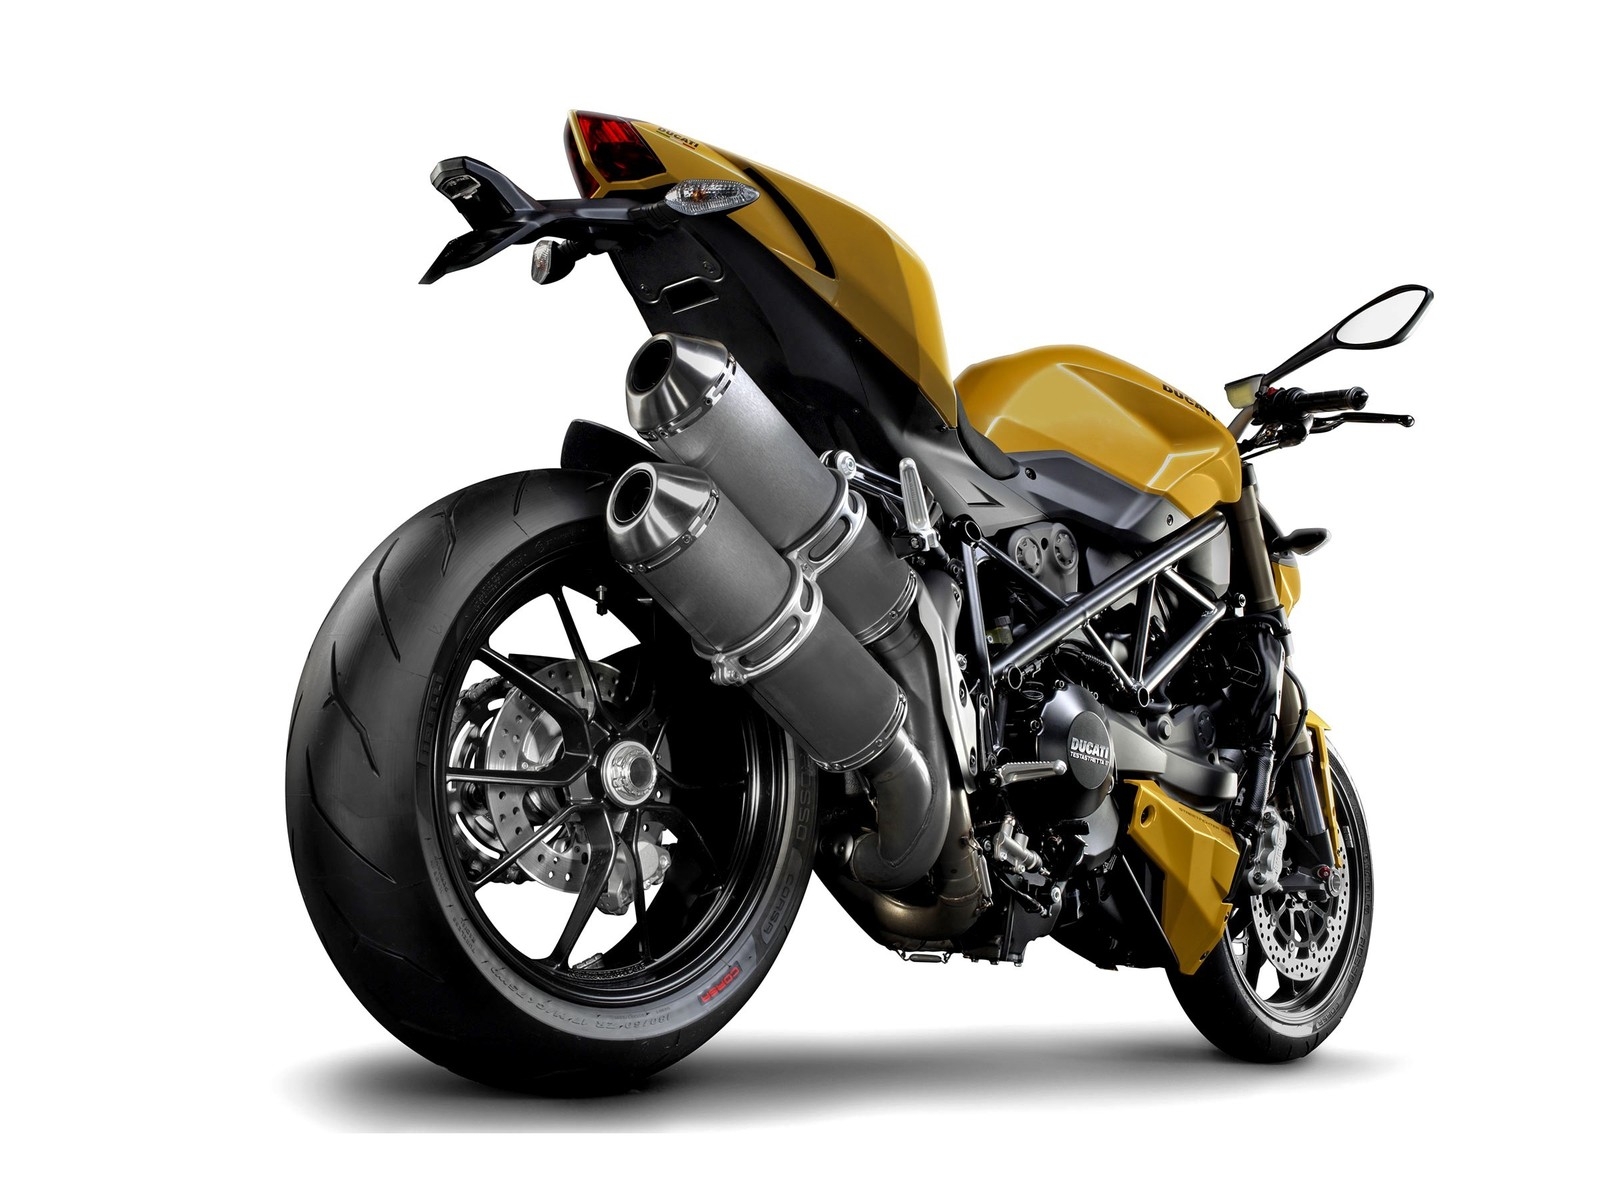  Ducati Streetfighter Rear for 1600 x 1200 resolution